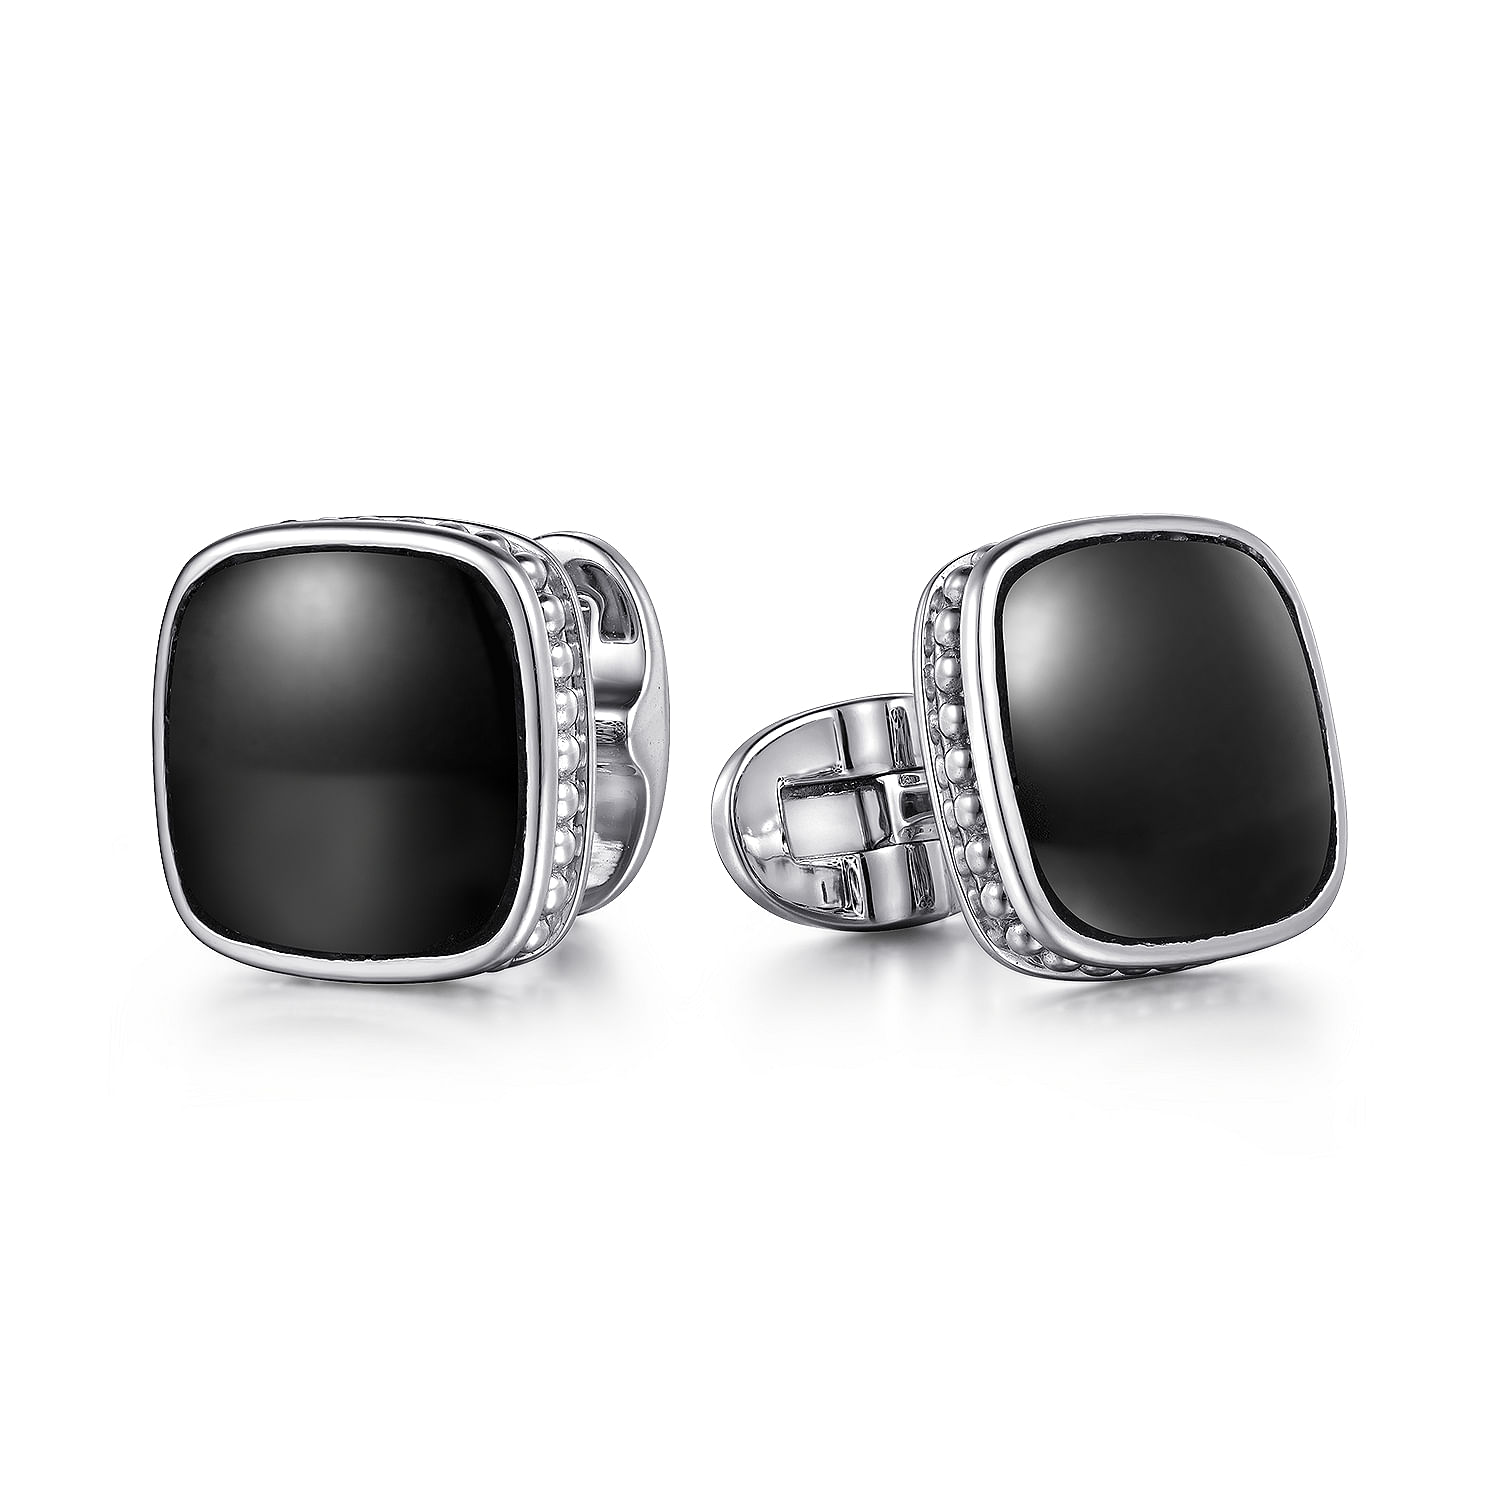 925 Sterling Silver Square Cufflinks with Onyx Stones